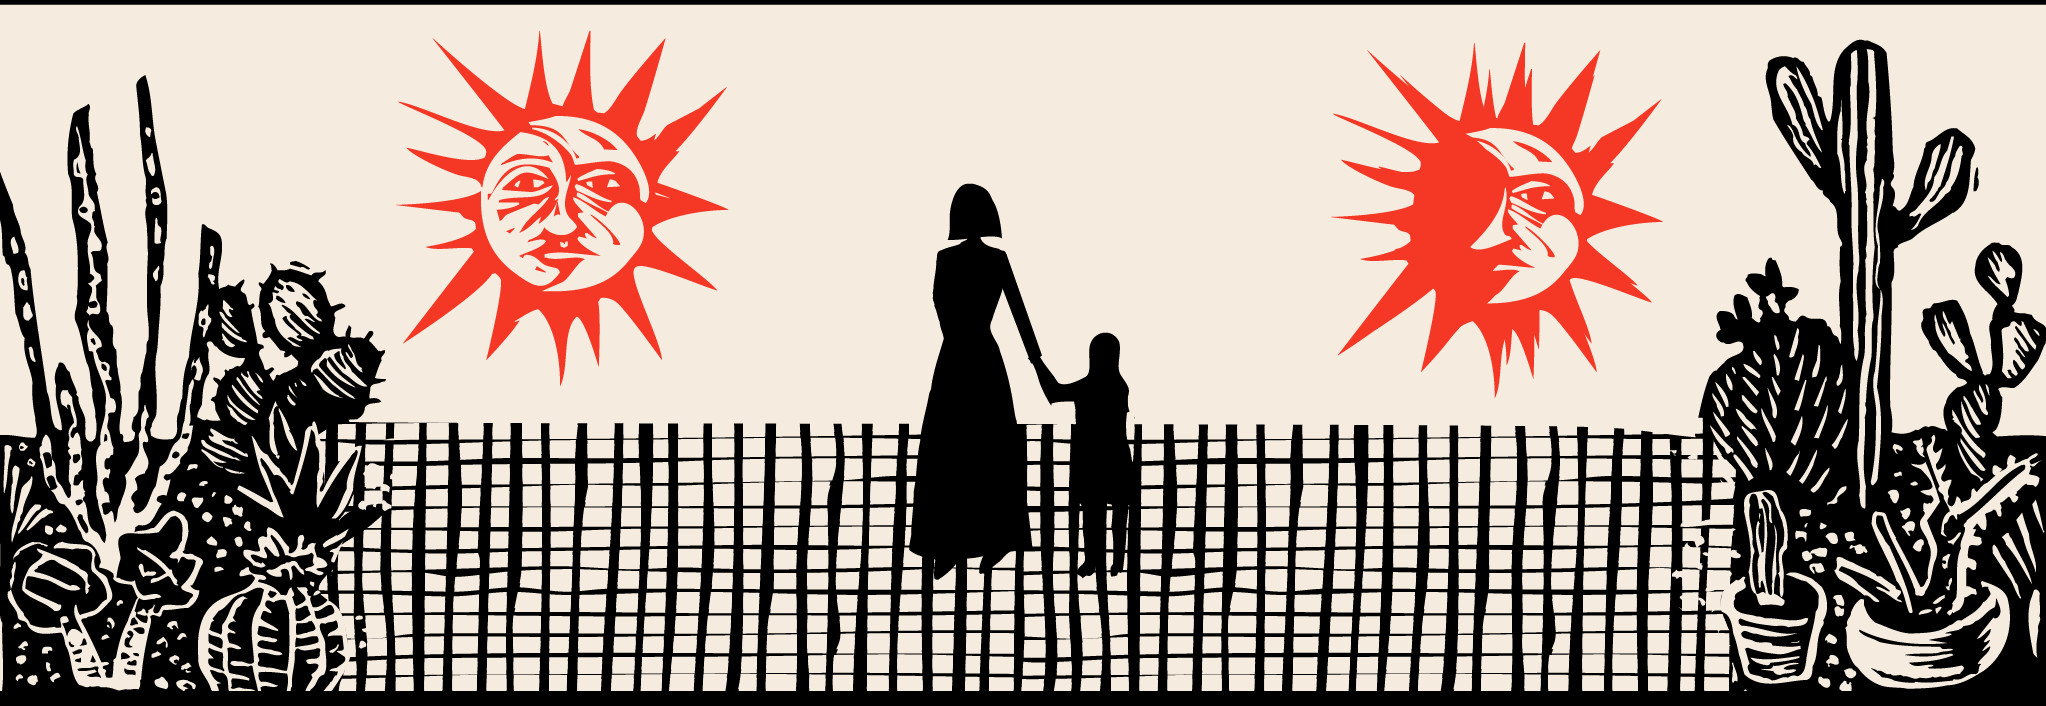 Illustration of a woman holding a child’s hand, in the sun, near cacti.